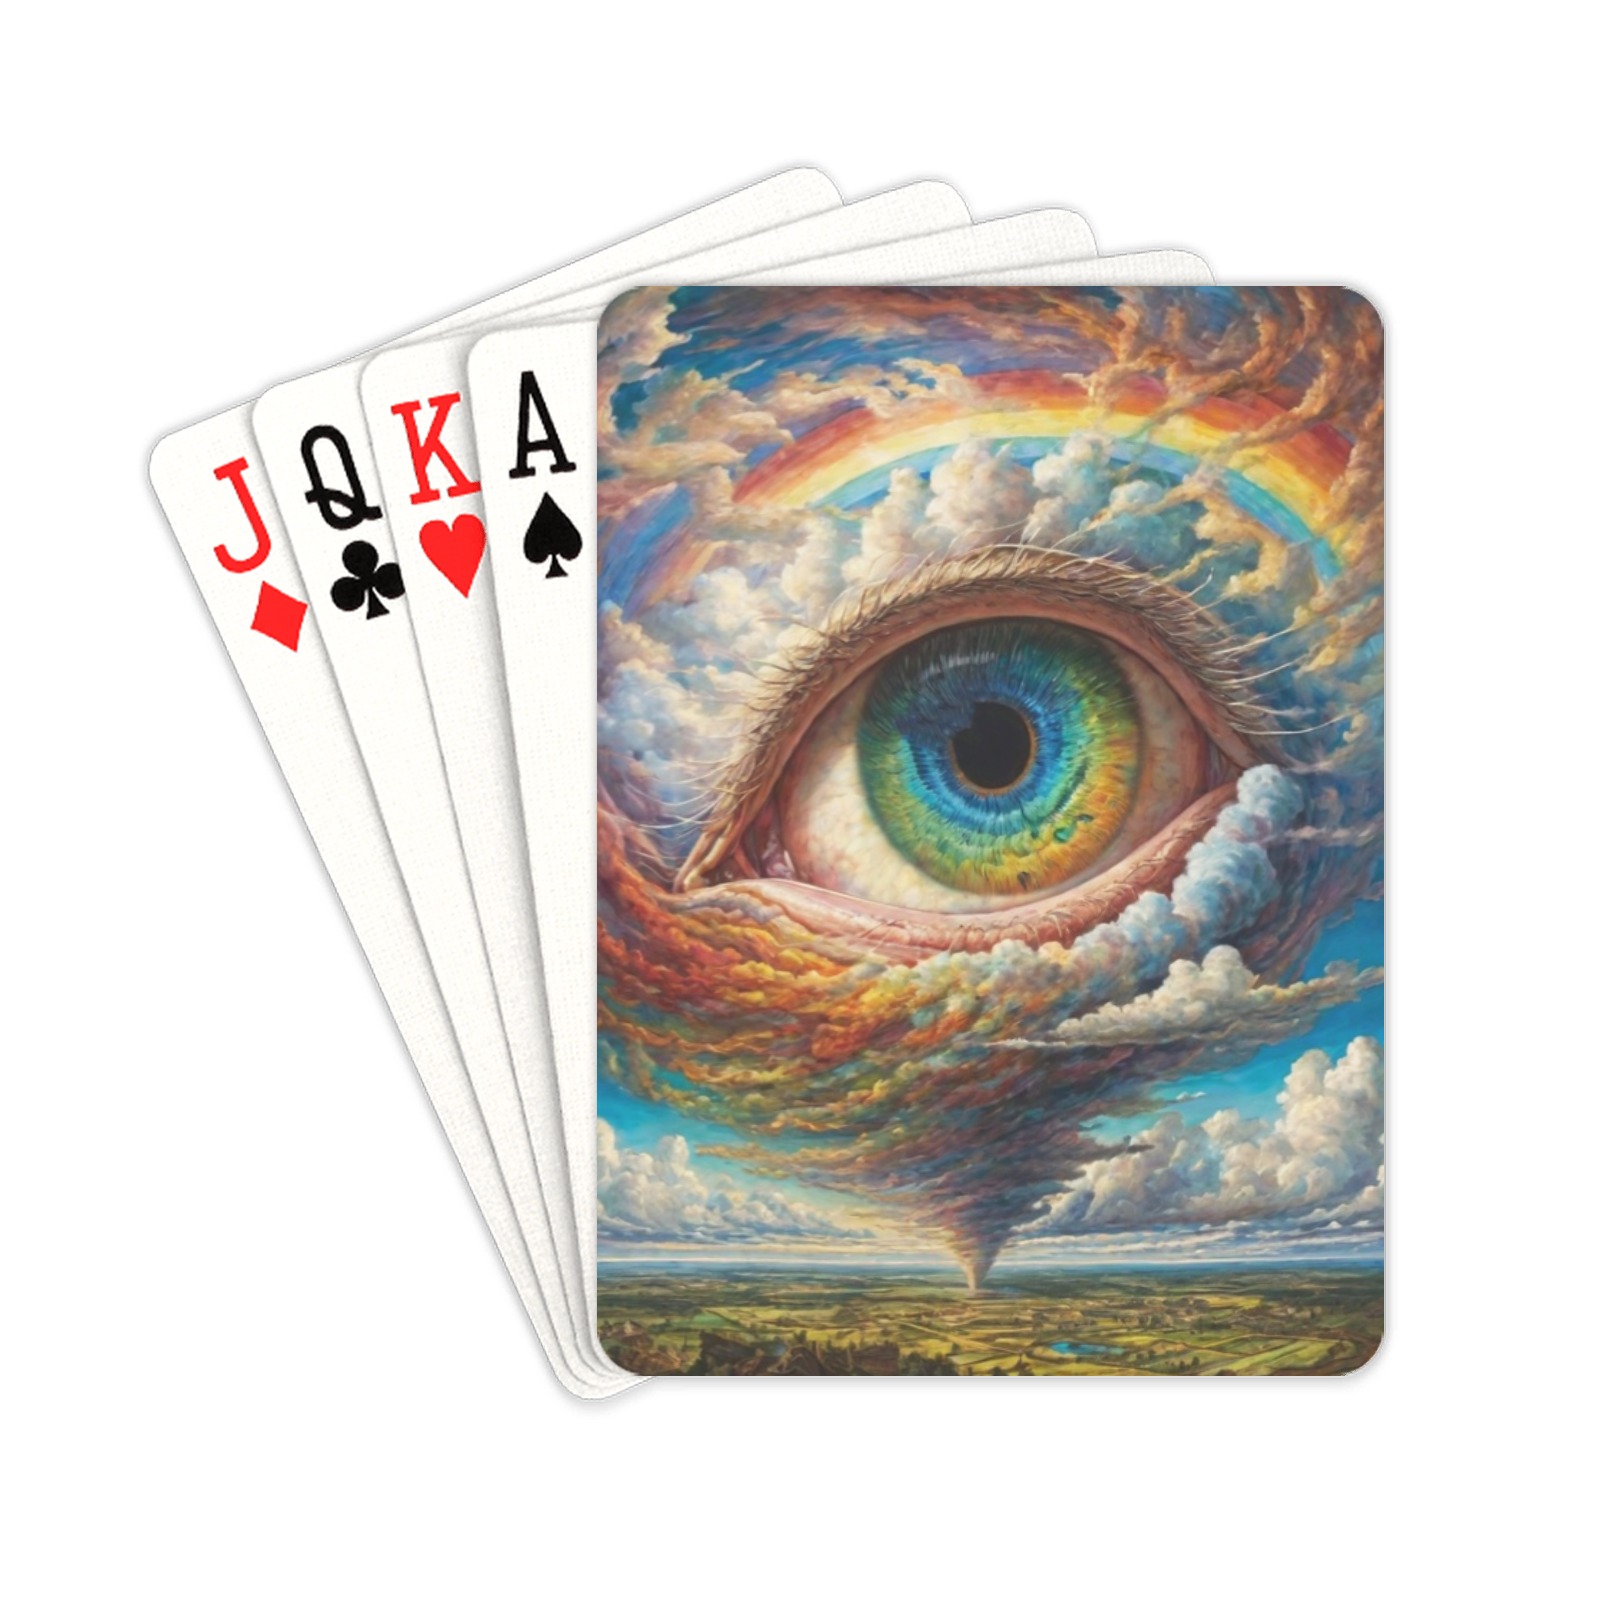 Eye Of The Storm Playing Cards 2.5"x3.5"